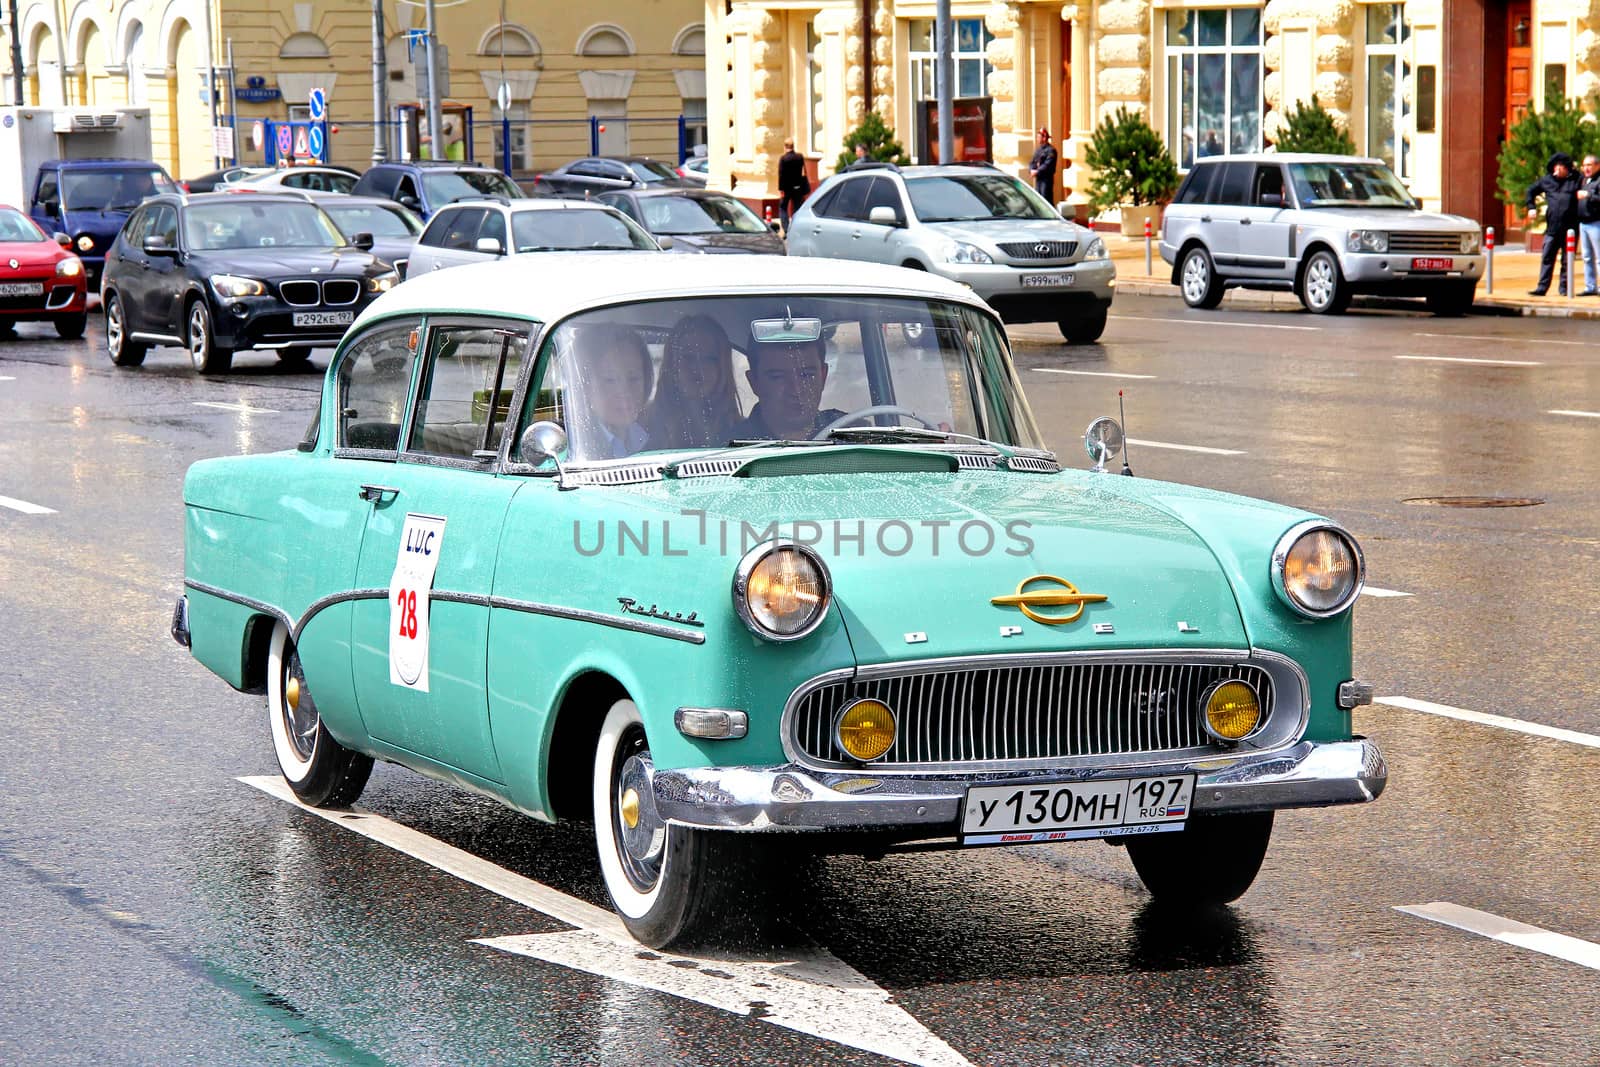 MOSCOW, RUSSIA - JUNE 3: German motor car Opel Rekord competes at the annual L.U.C. Chopard Classic Weekend Rally on June 3, 2012 in Moscow, Russia.